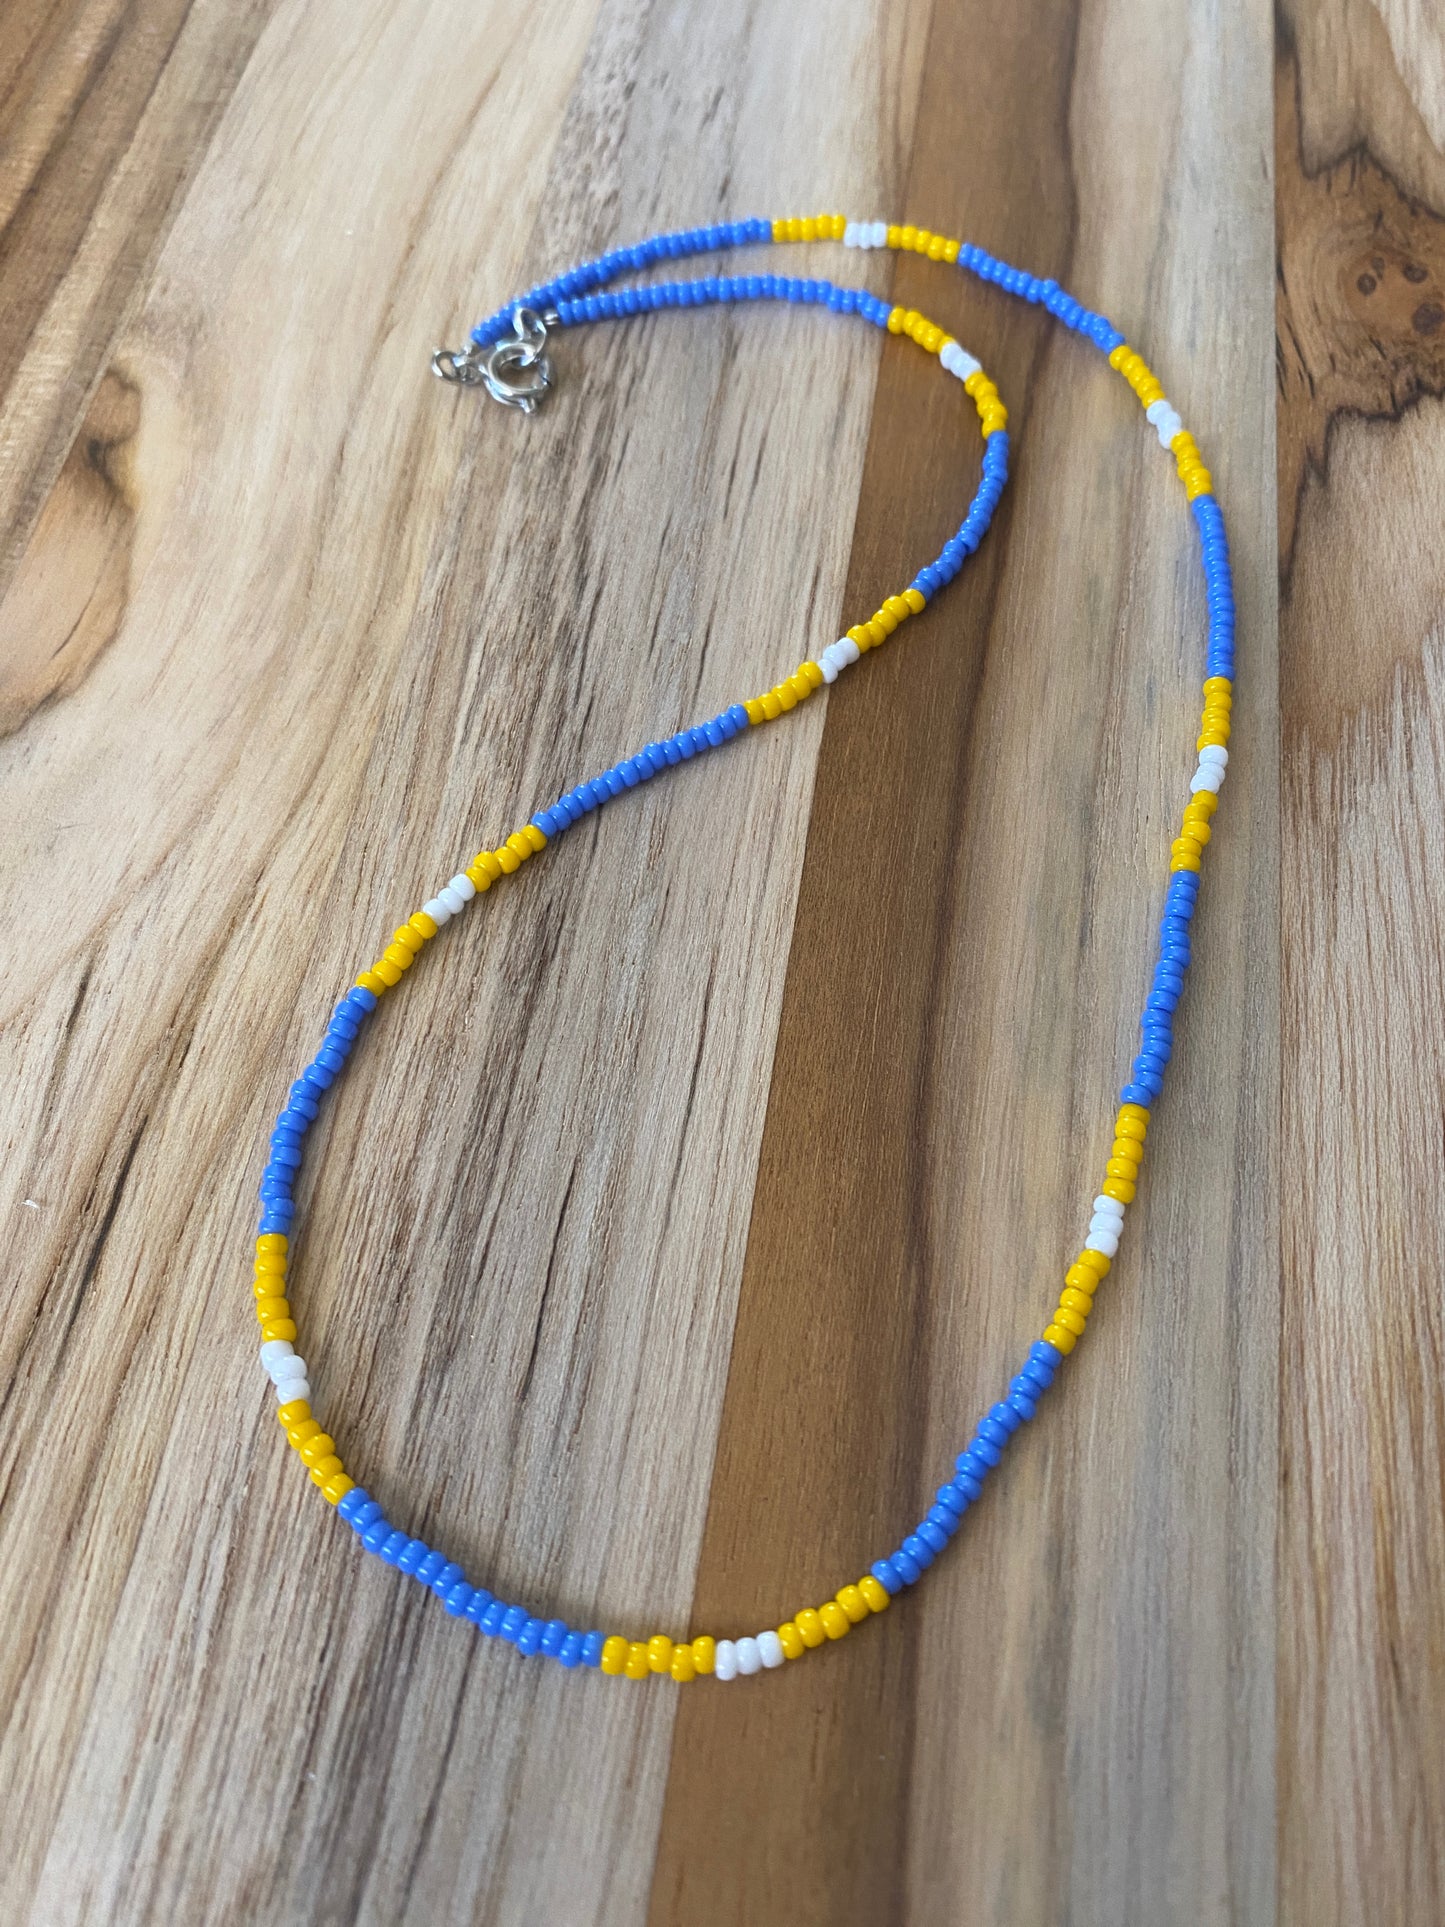 16" Dainty Minimalist Seed Bead Necklace Multi colored blue yellow white - My Urban Gems